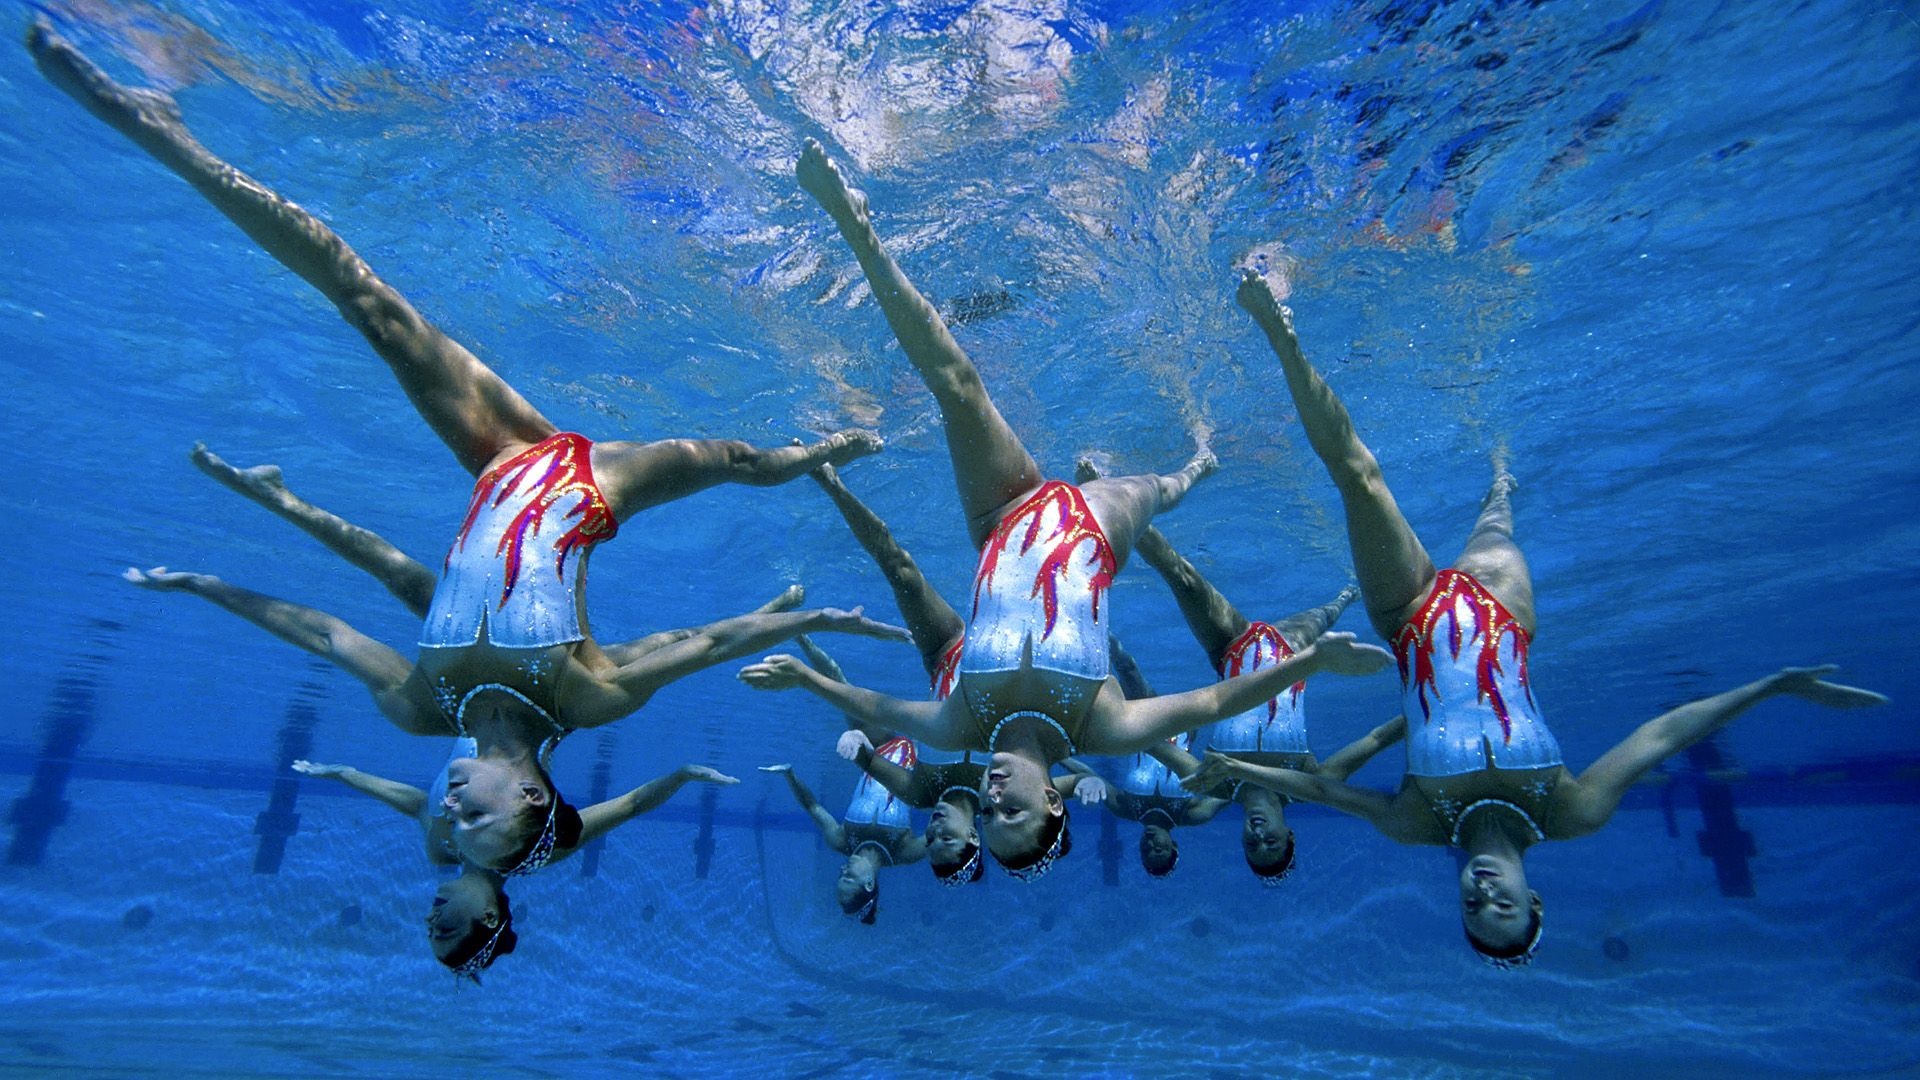 Synchronized Swimming: An underwater ballet, An artistic sports discipline traditionally performed by women. 1920x1080 Full HD Background.